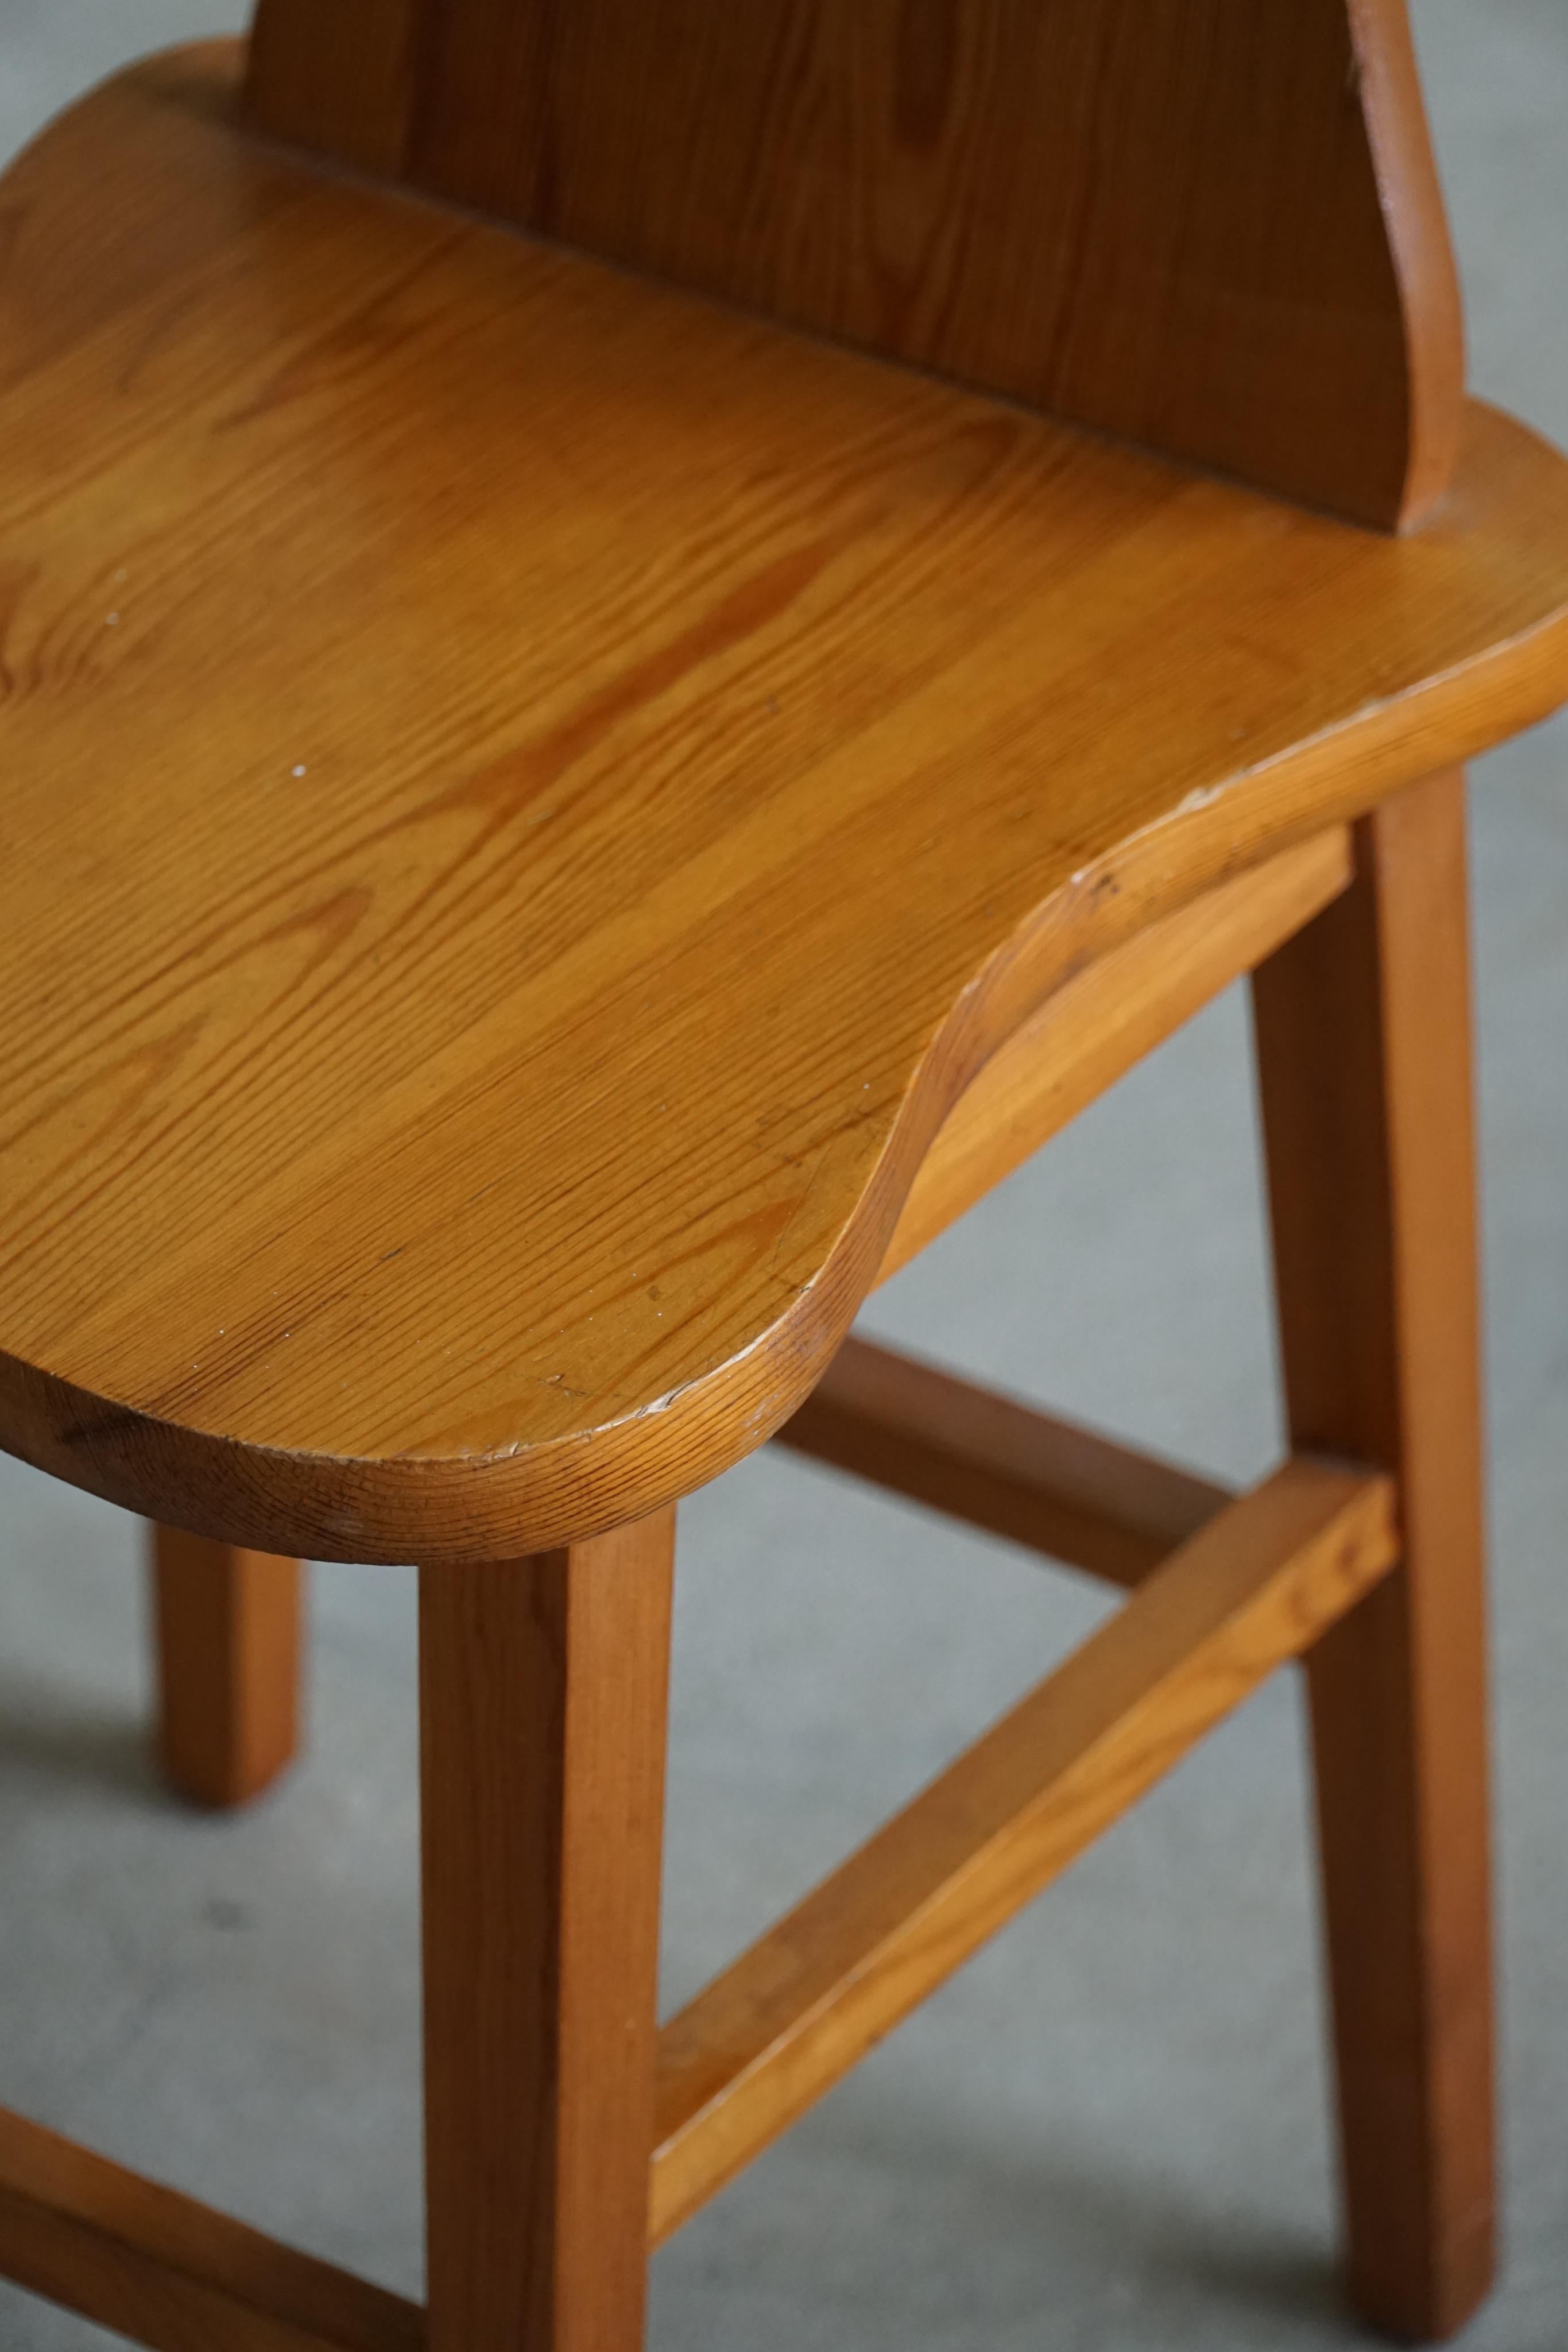 Set of 4 Chairs in Pine, by a Swedish Cabinetmaker, Scandinavian Modern, 1960s For Sale 2